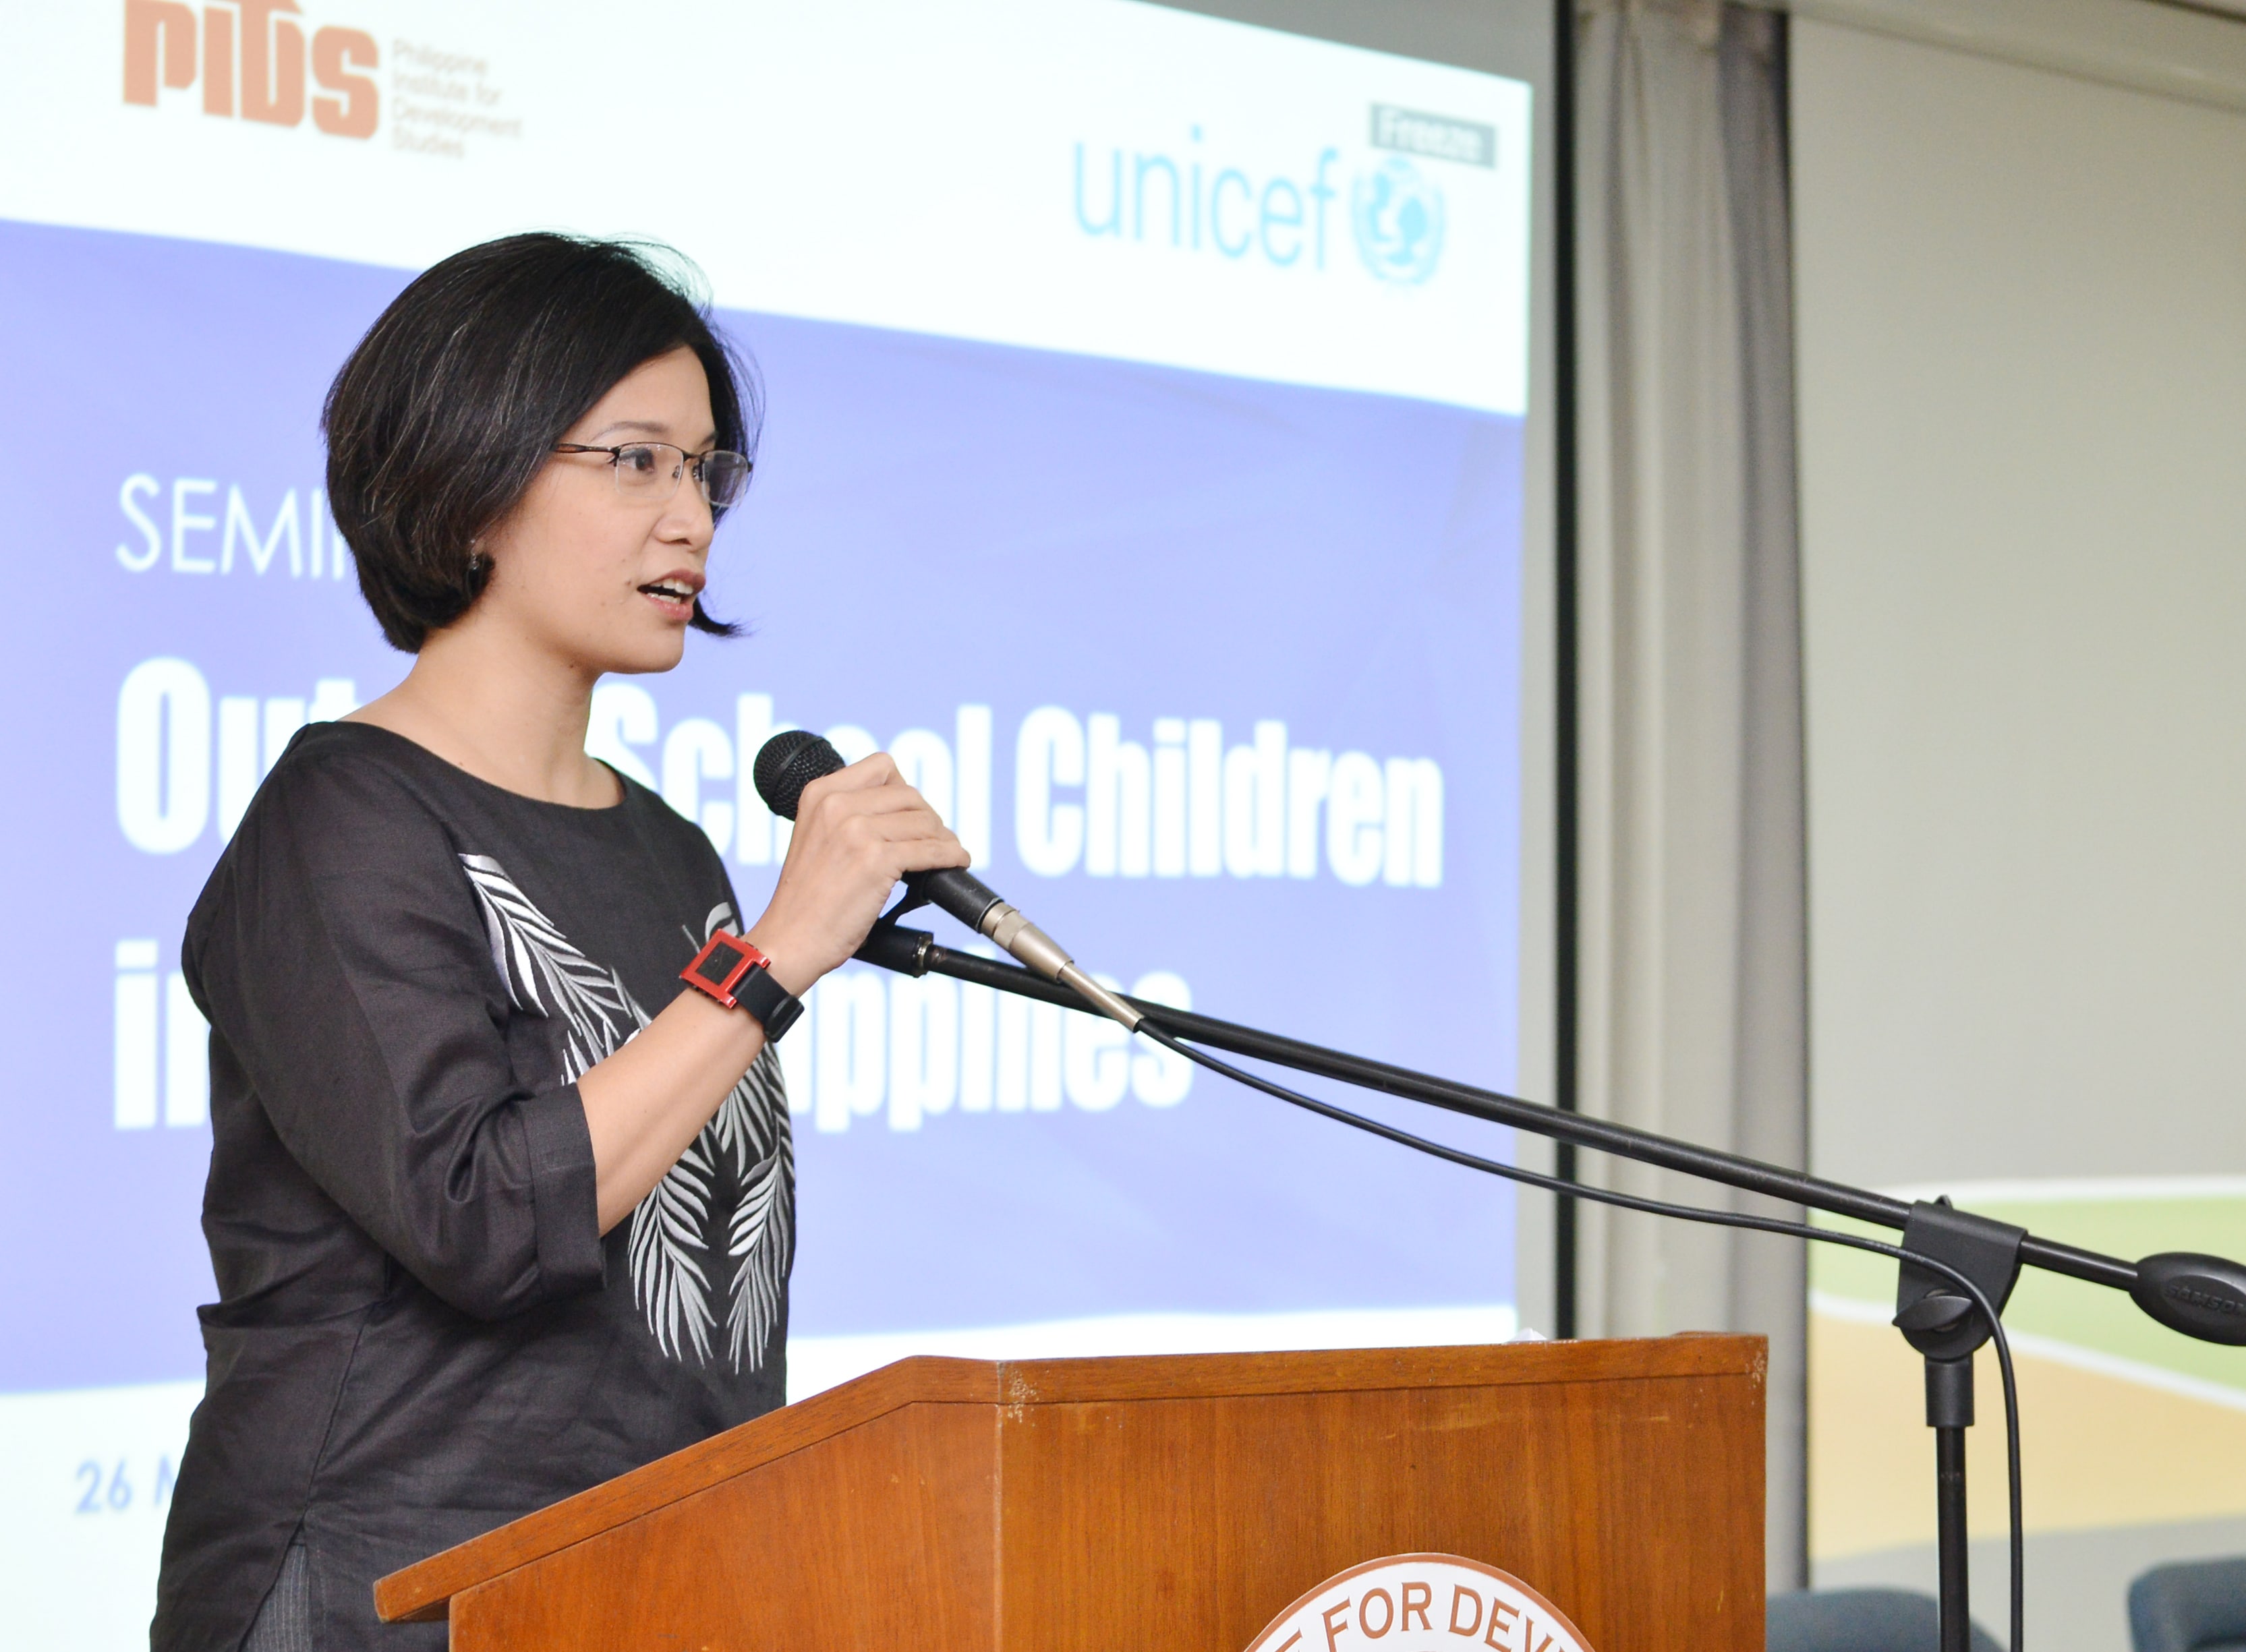 Seminar On Out-Of-School Children (OOSC) In The Philippines-DSC_3123.jpg